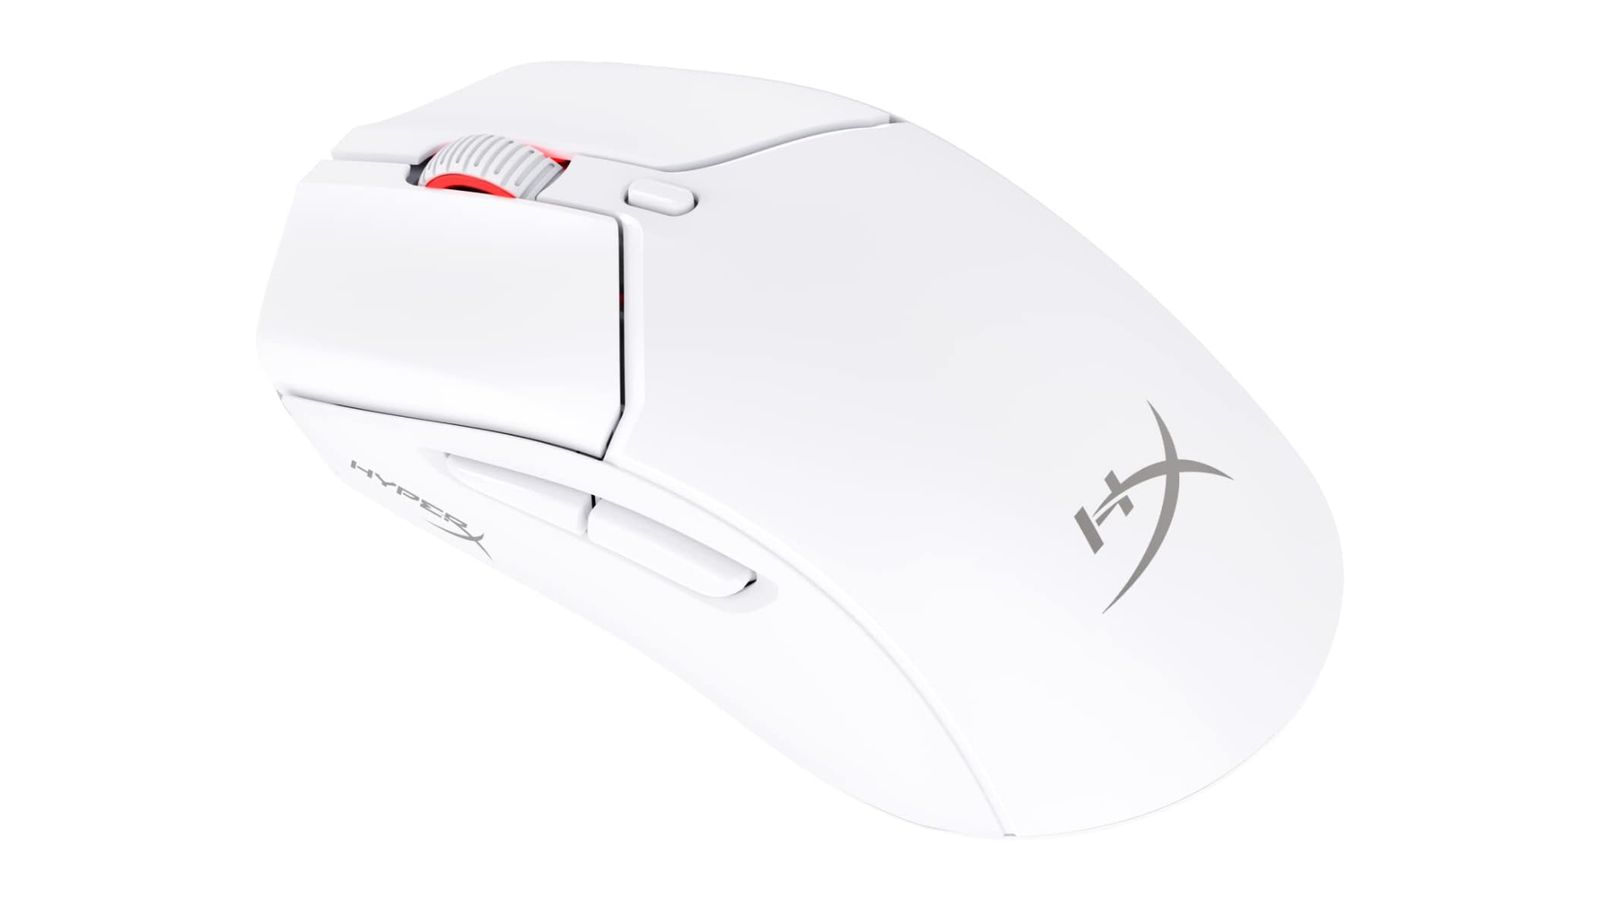 HyperX Pulsefire Haste 2 product image of a white mouse with a grey HyperX logo at the bottom and red detail on the scroll wheel.